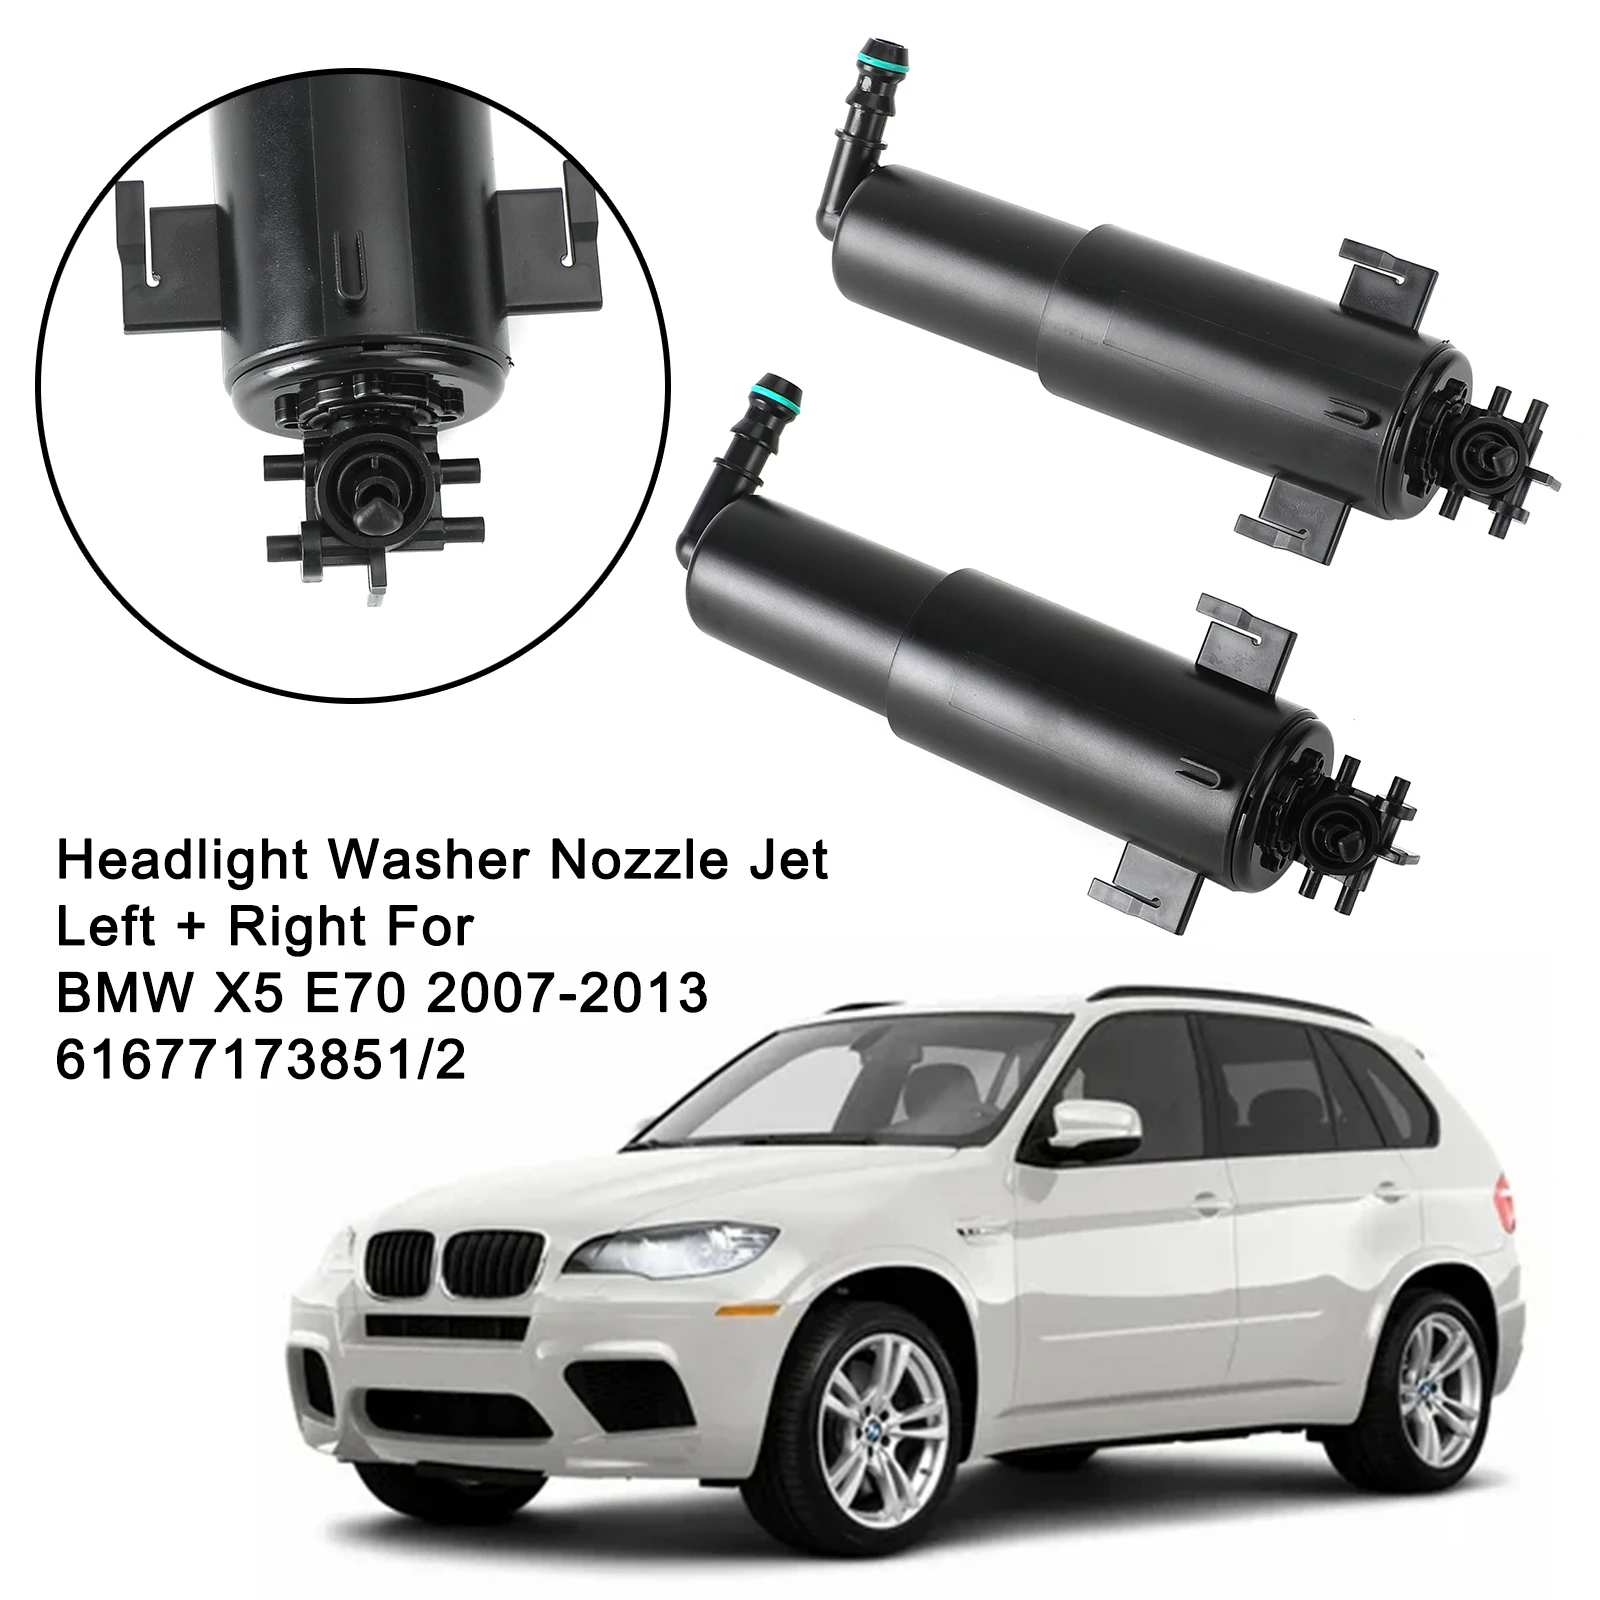 

Areyourshop Headlight Washer Nozzle Jet Left + Right For BMW X5 E70 2007-2013 61677173851/2 61674286754 Car Auto Parts